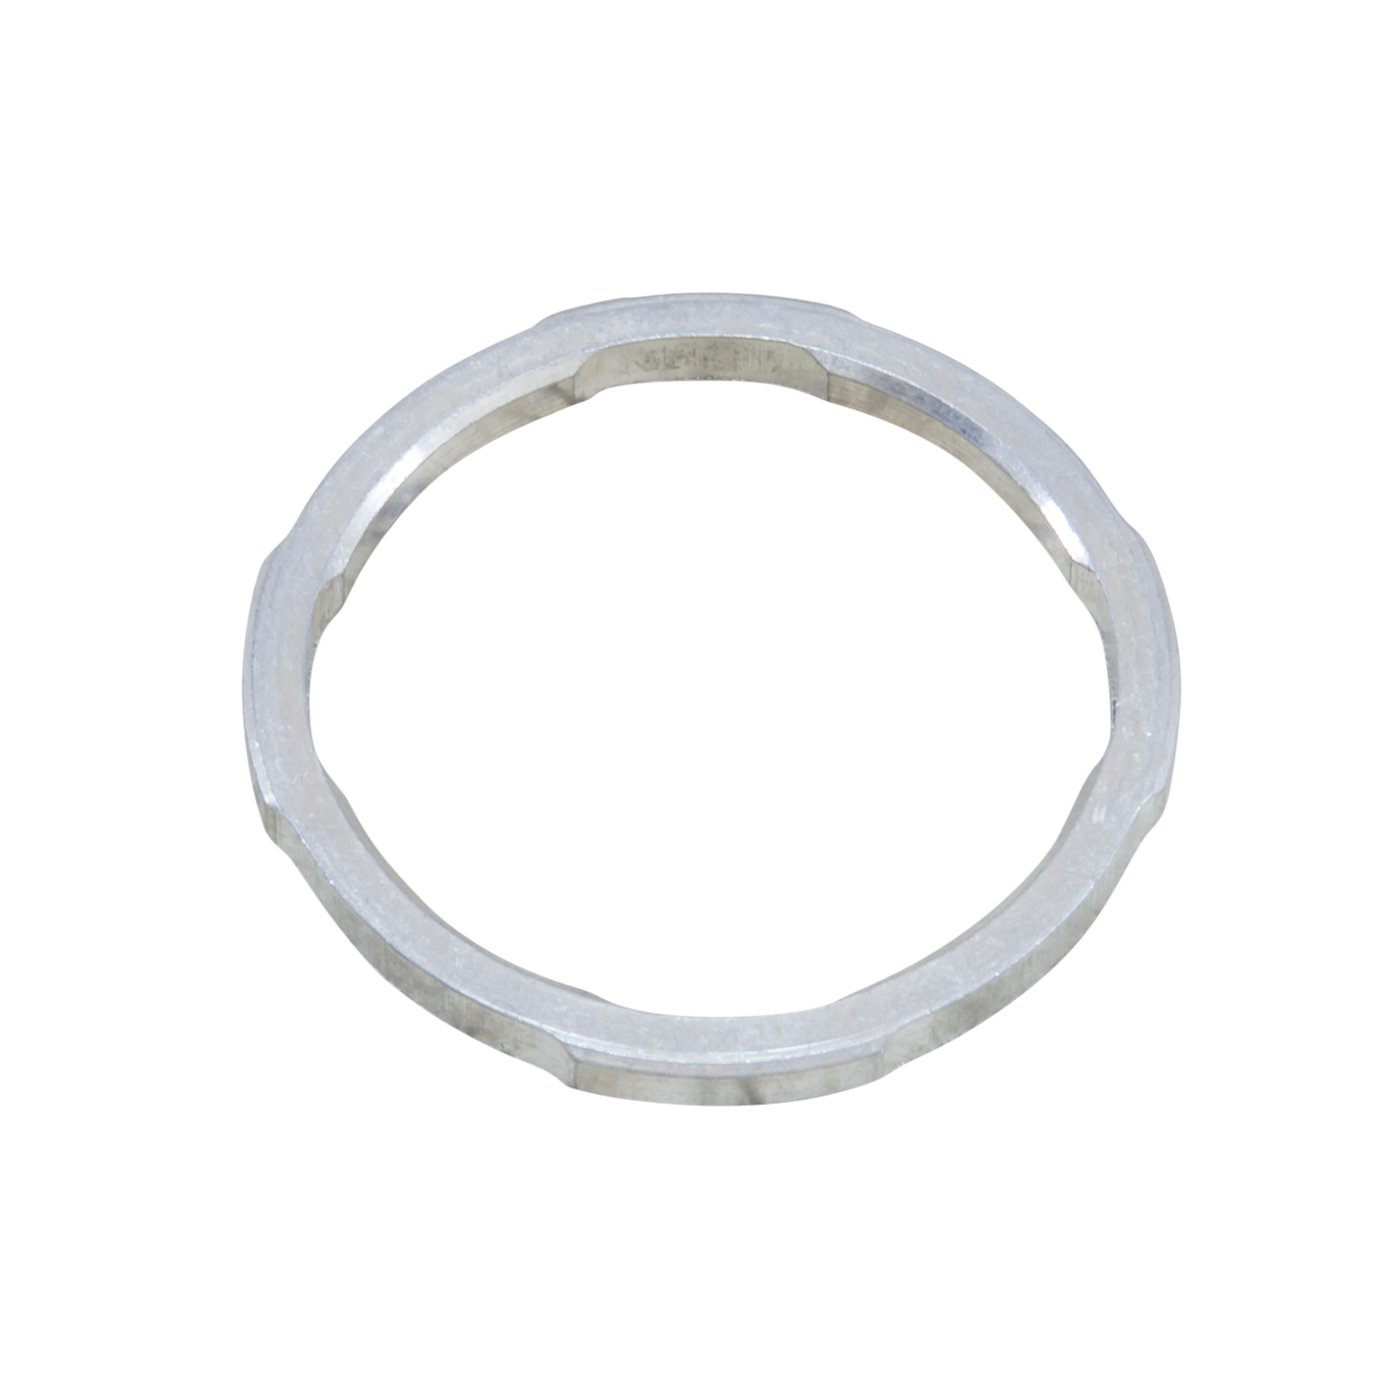 GM 8.25 in. Ifs Side Bearing Adjuster Lock Ring, '07 & Up